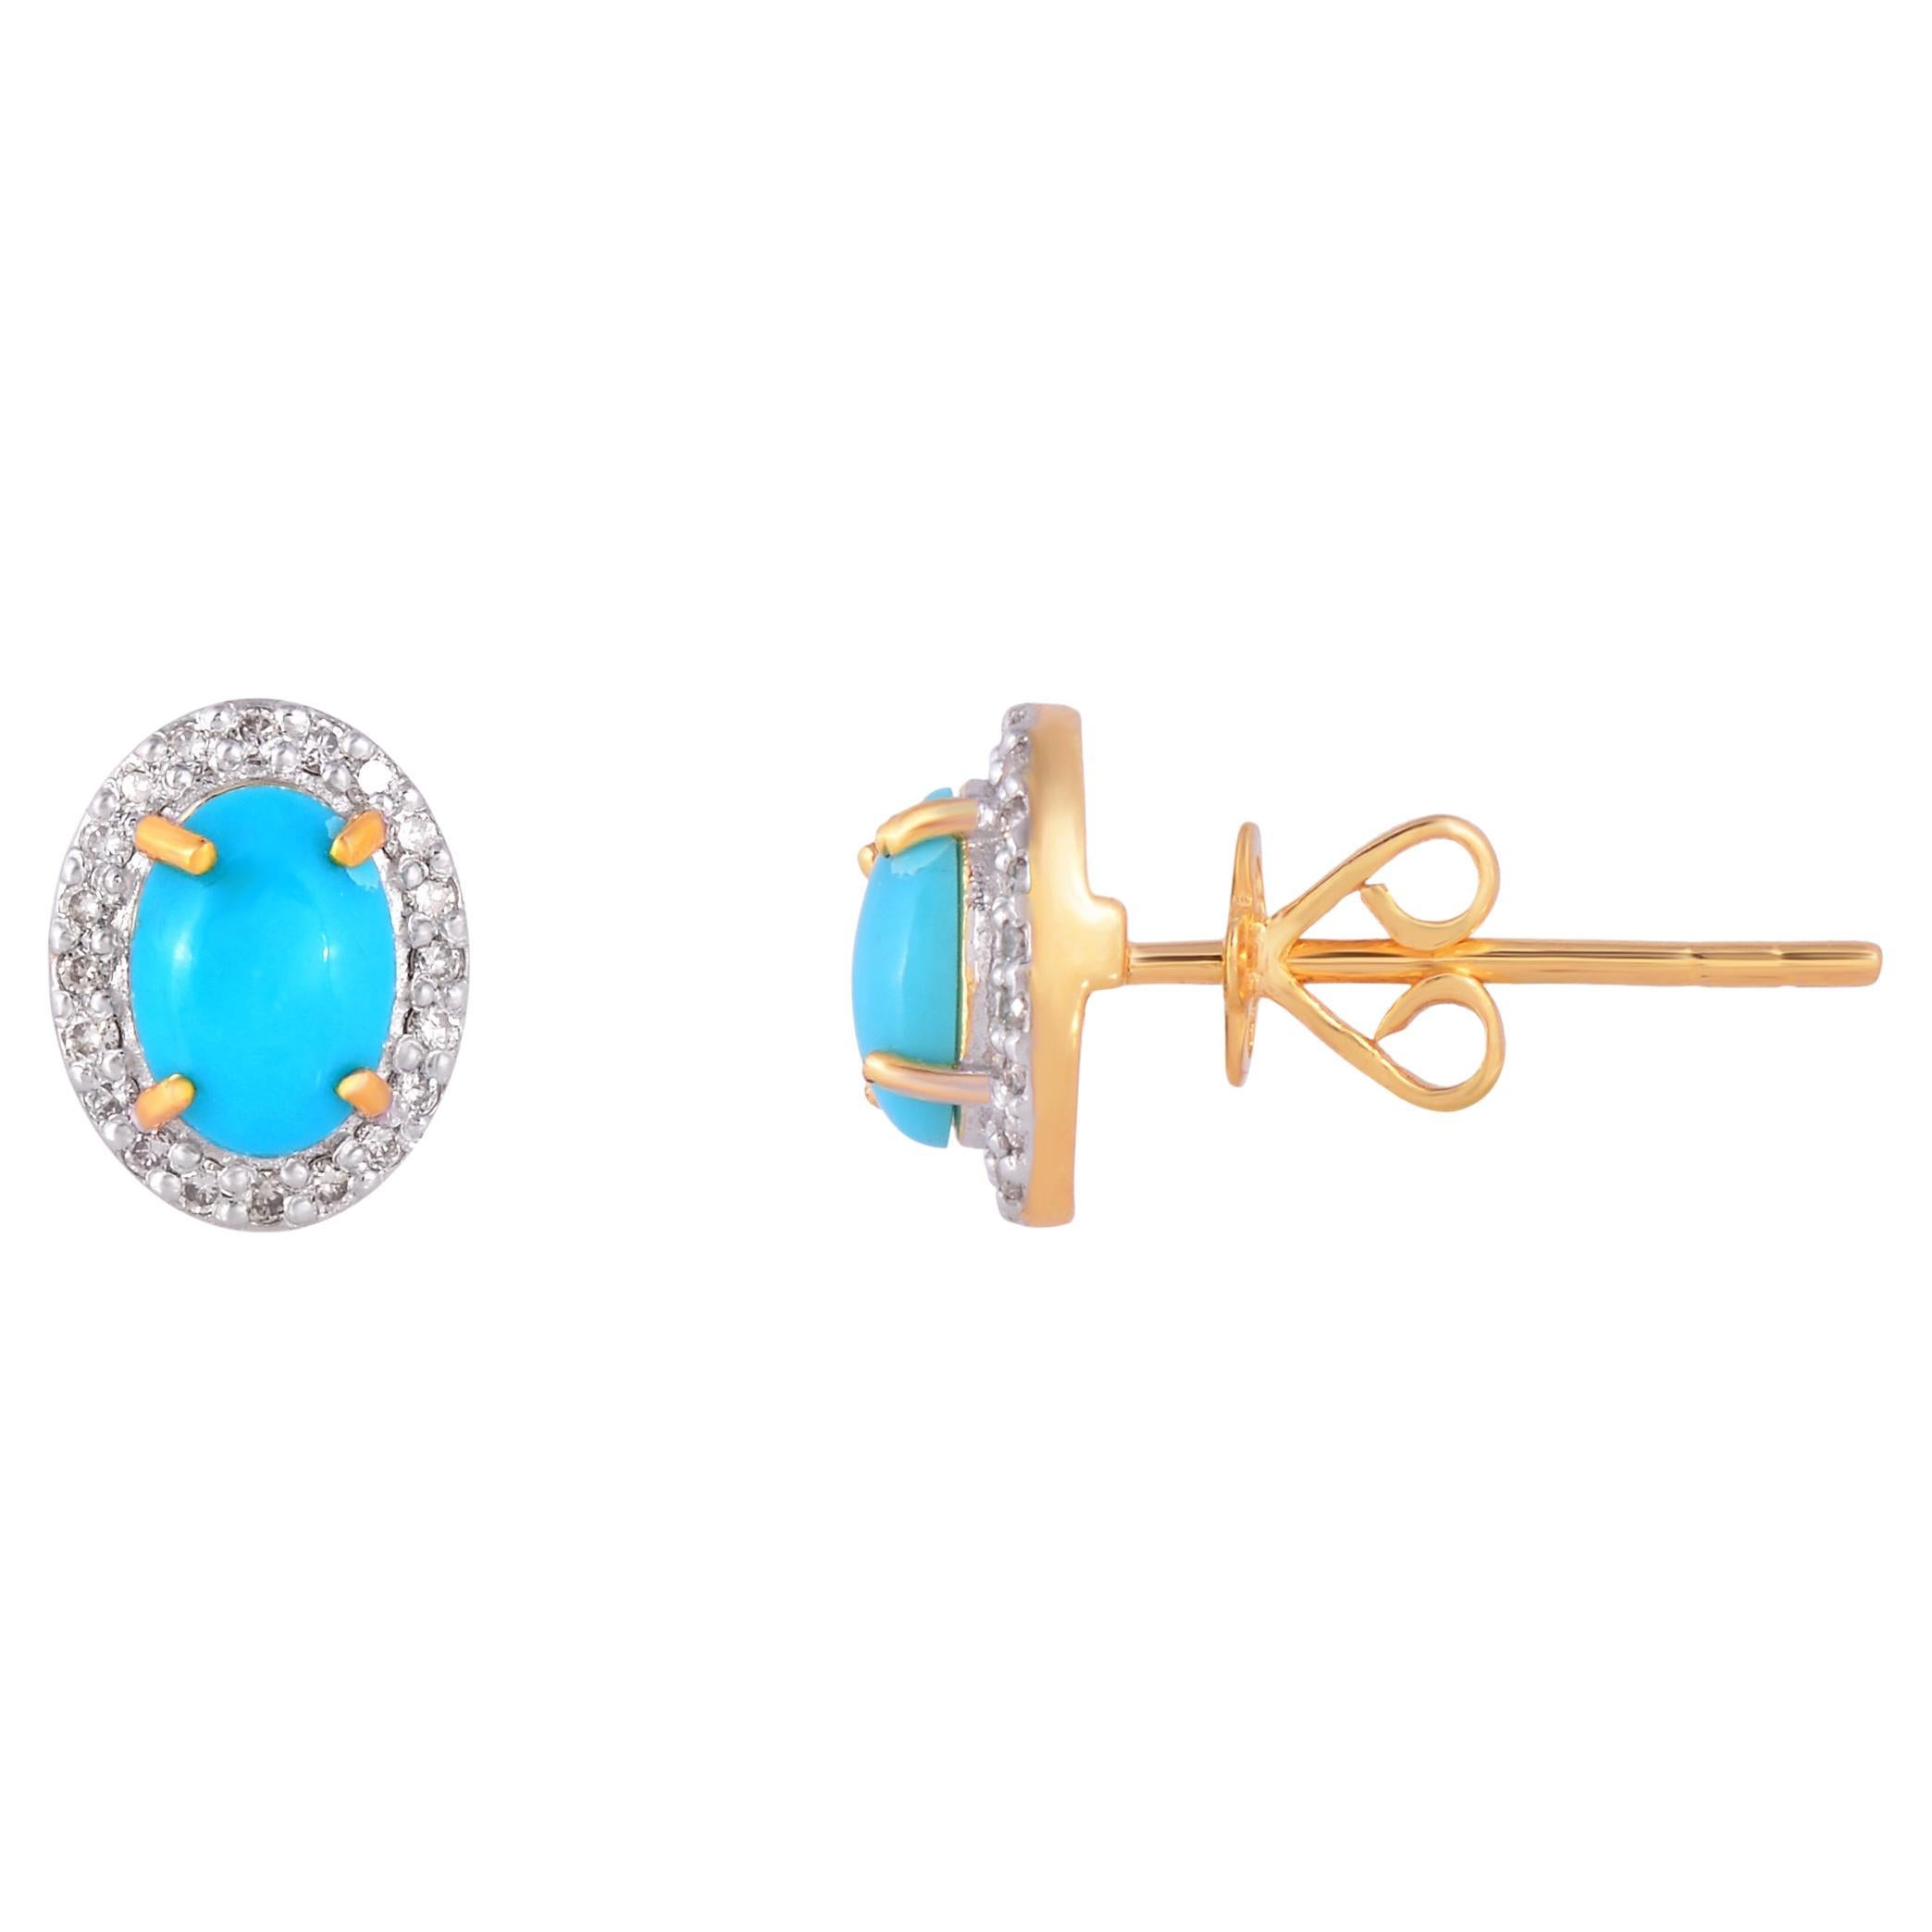 Turquoise Stud Earrings with Diamond in 18k Gold For Sale at 1stDibs